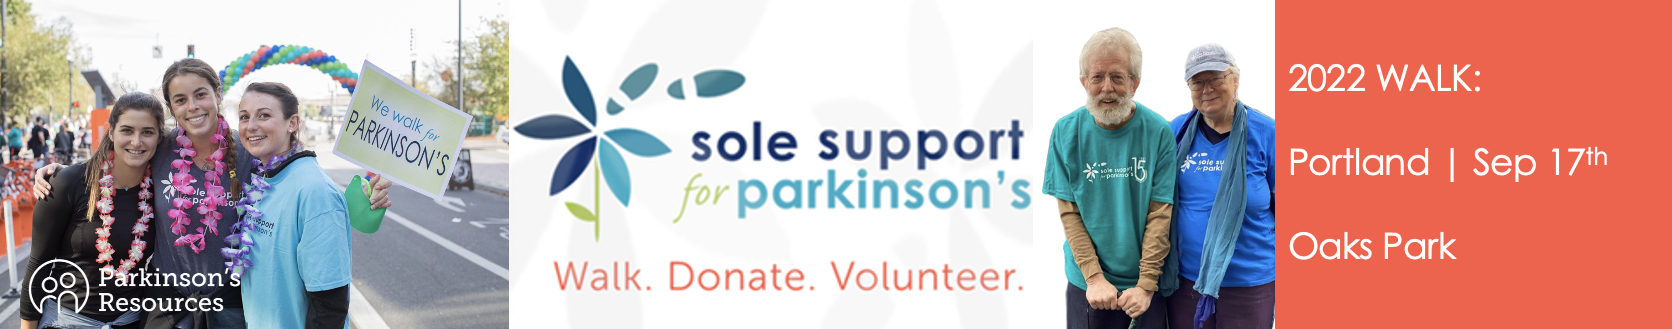 Sole Support for Parkinson's date September 17